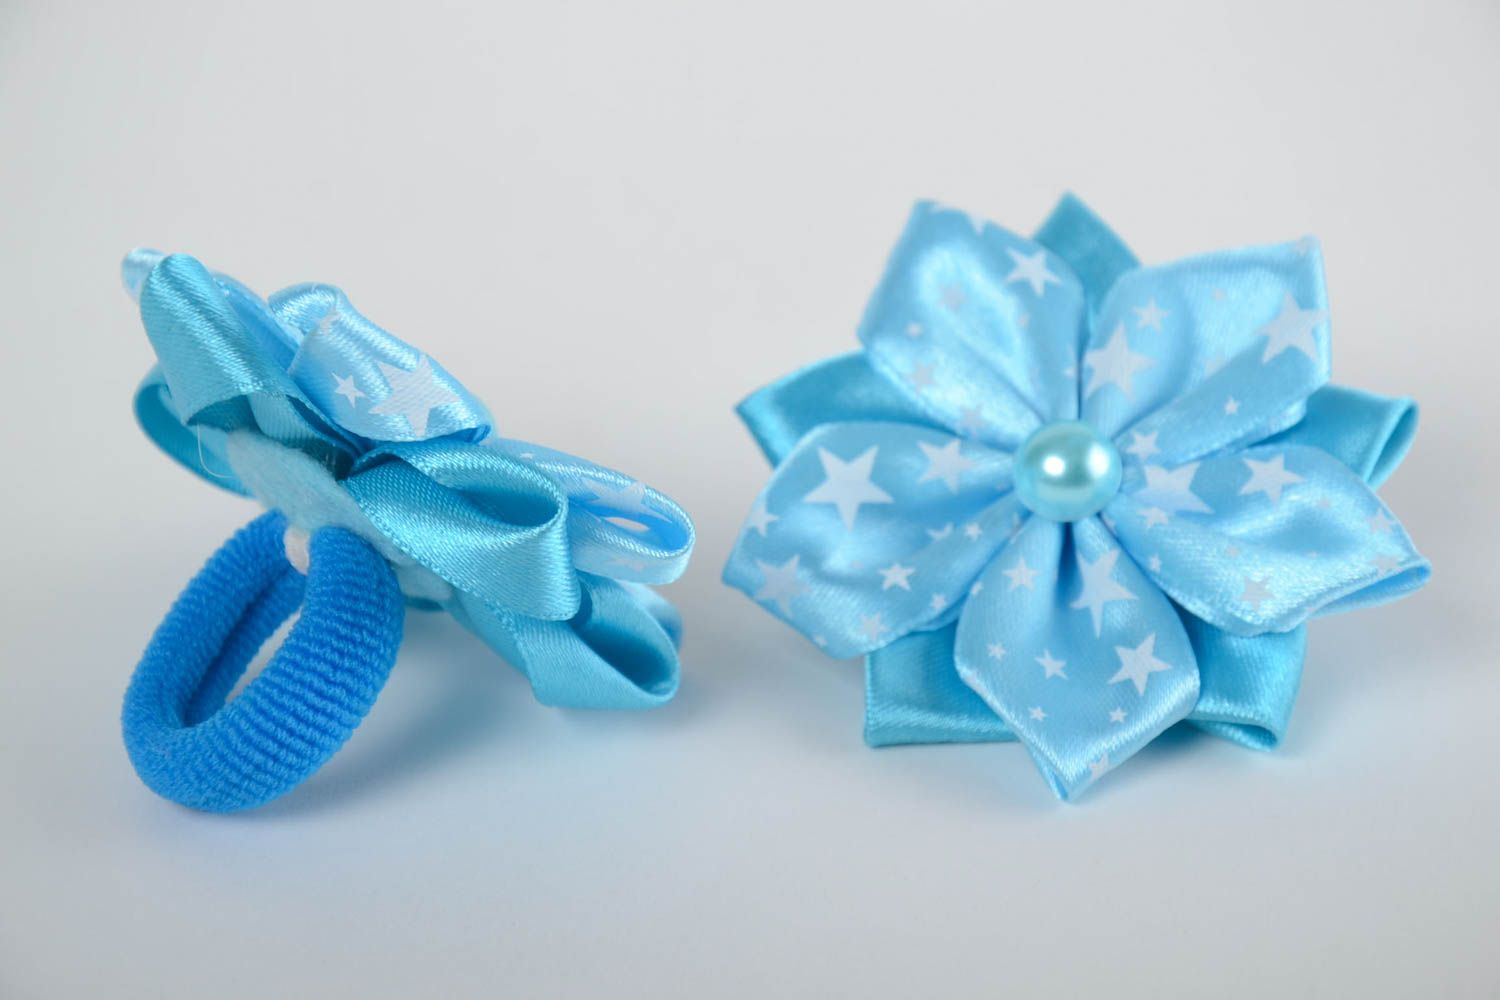 Handmade blue hair ties with flowers of satin ribbons for kids 2 pieces photo 2